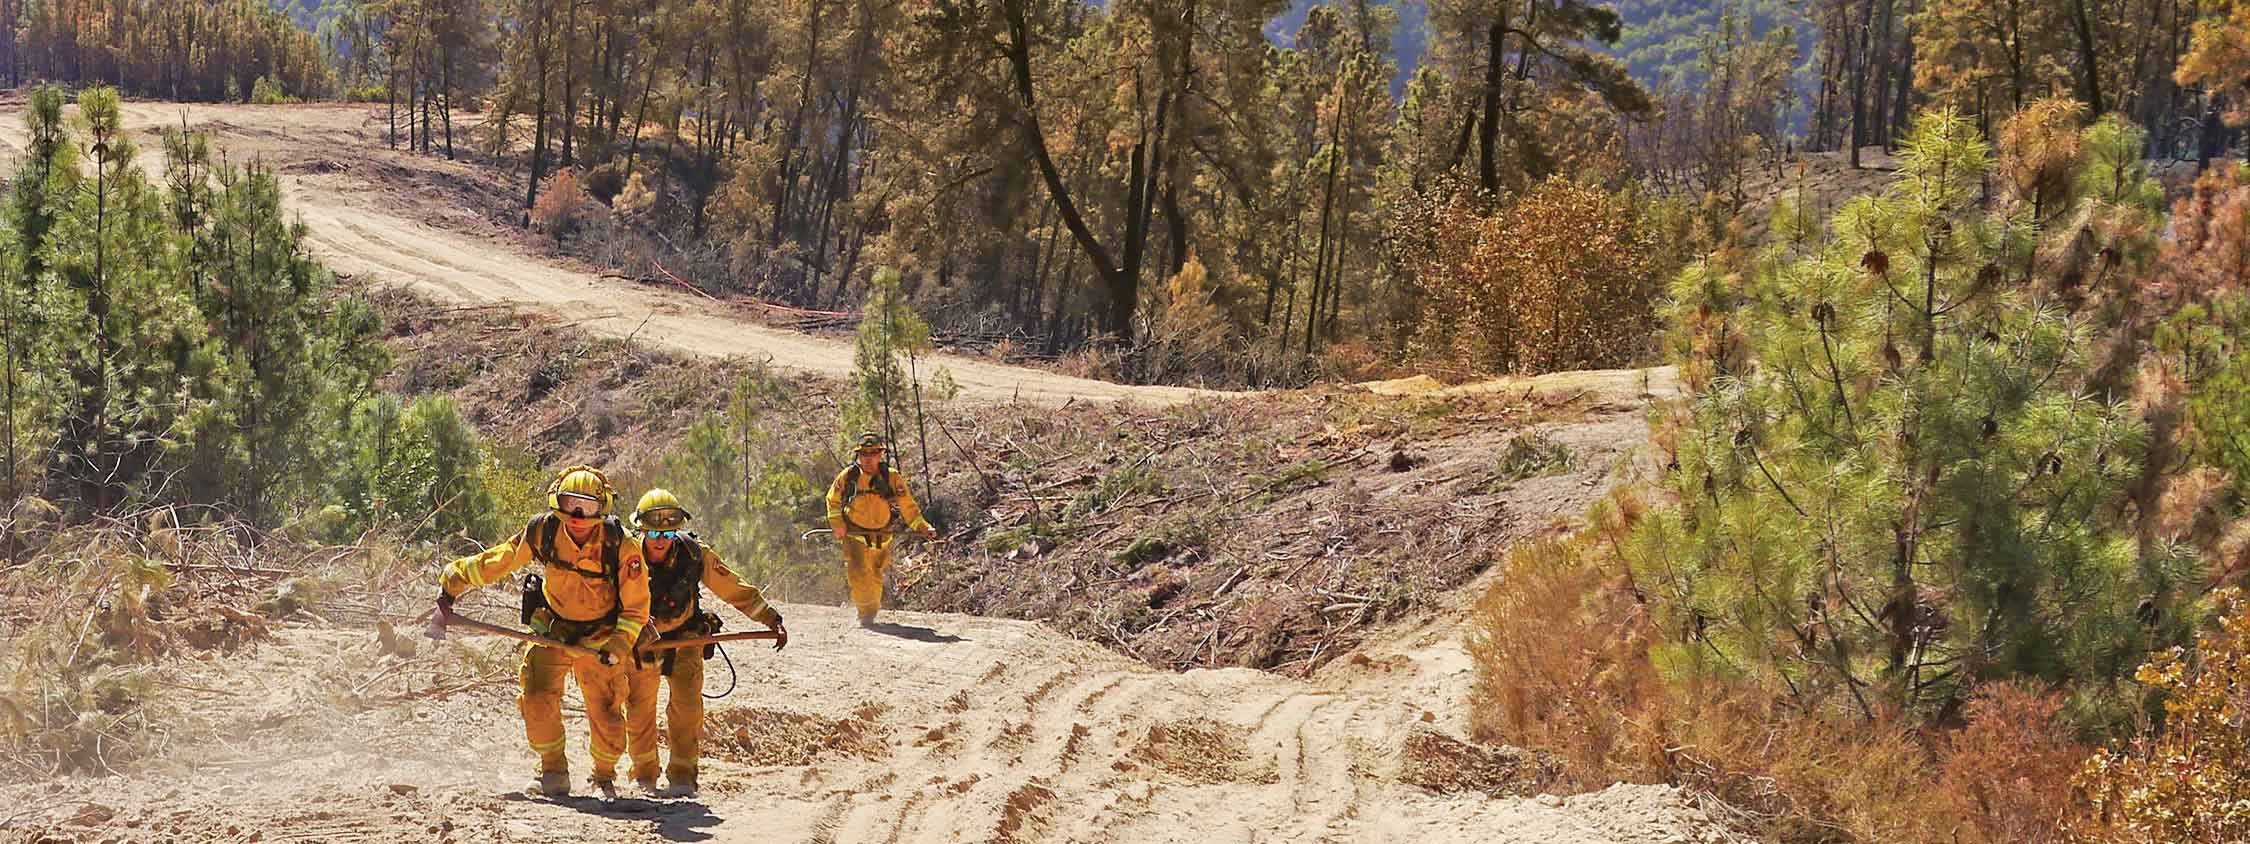 Firefighters in yellow uniforms walking uphill on dirt trail through forest